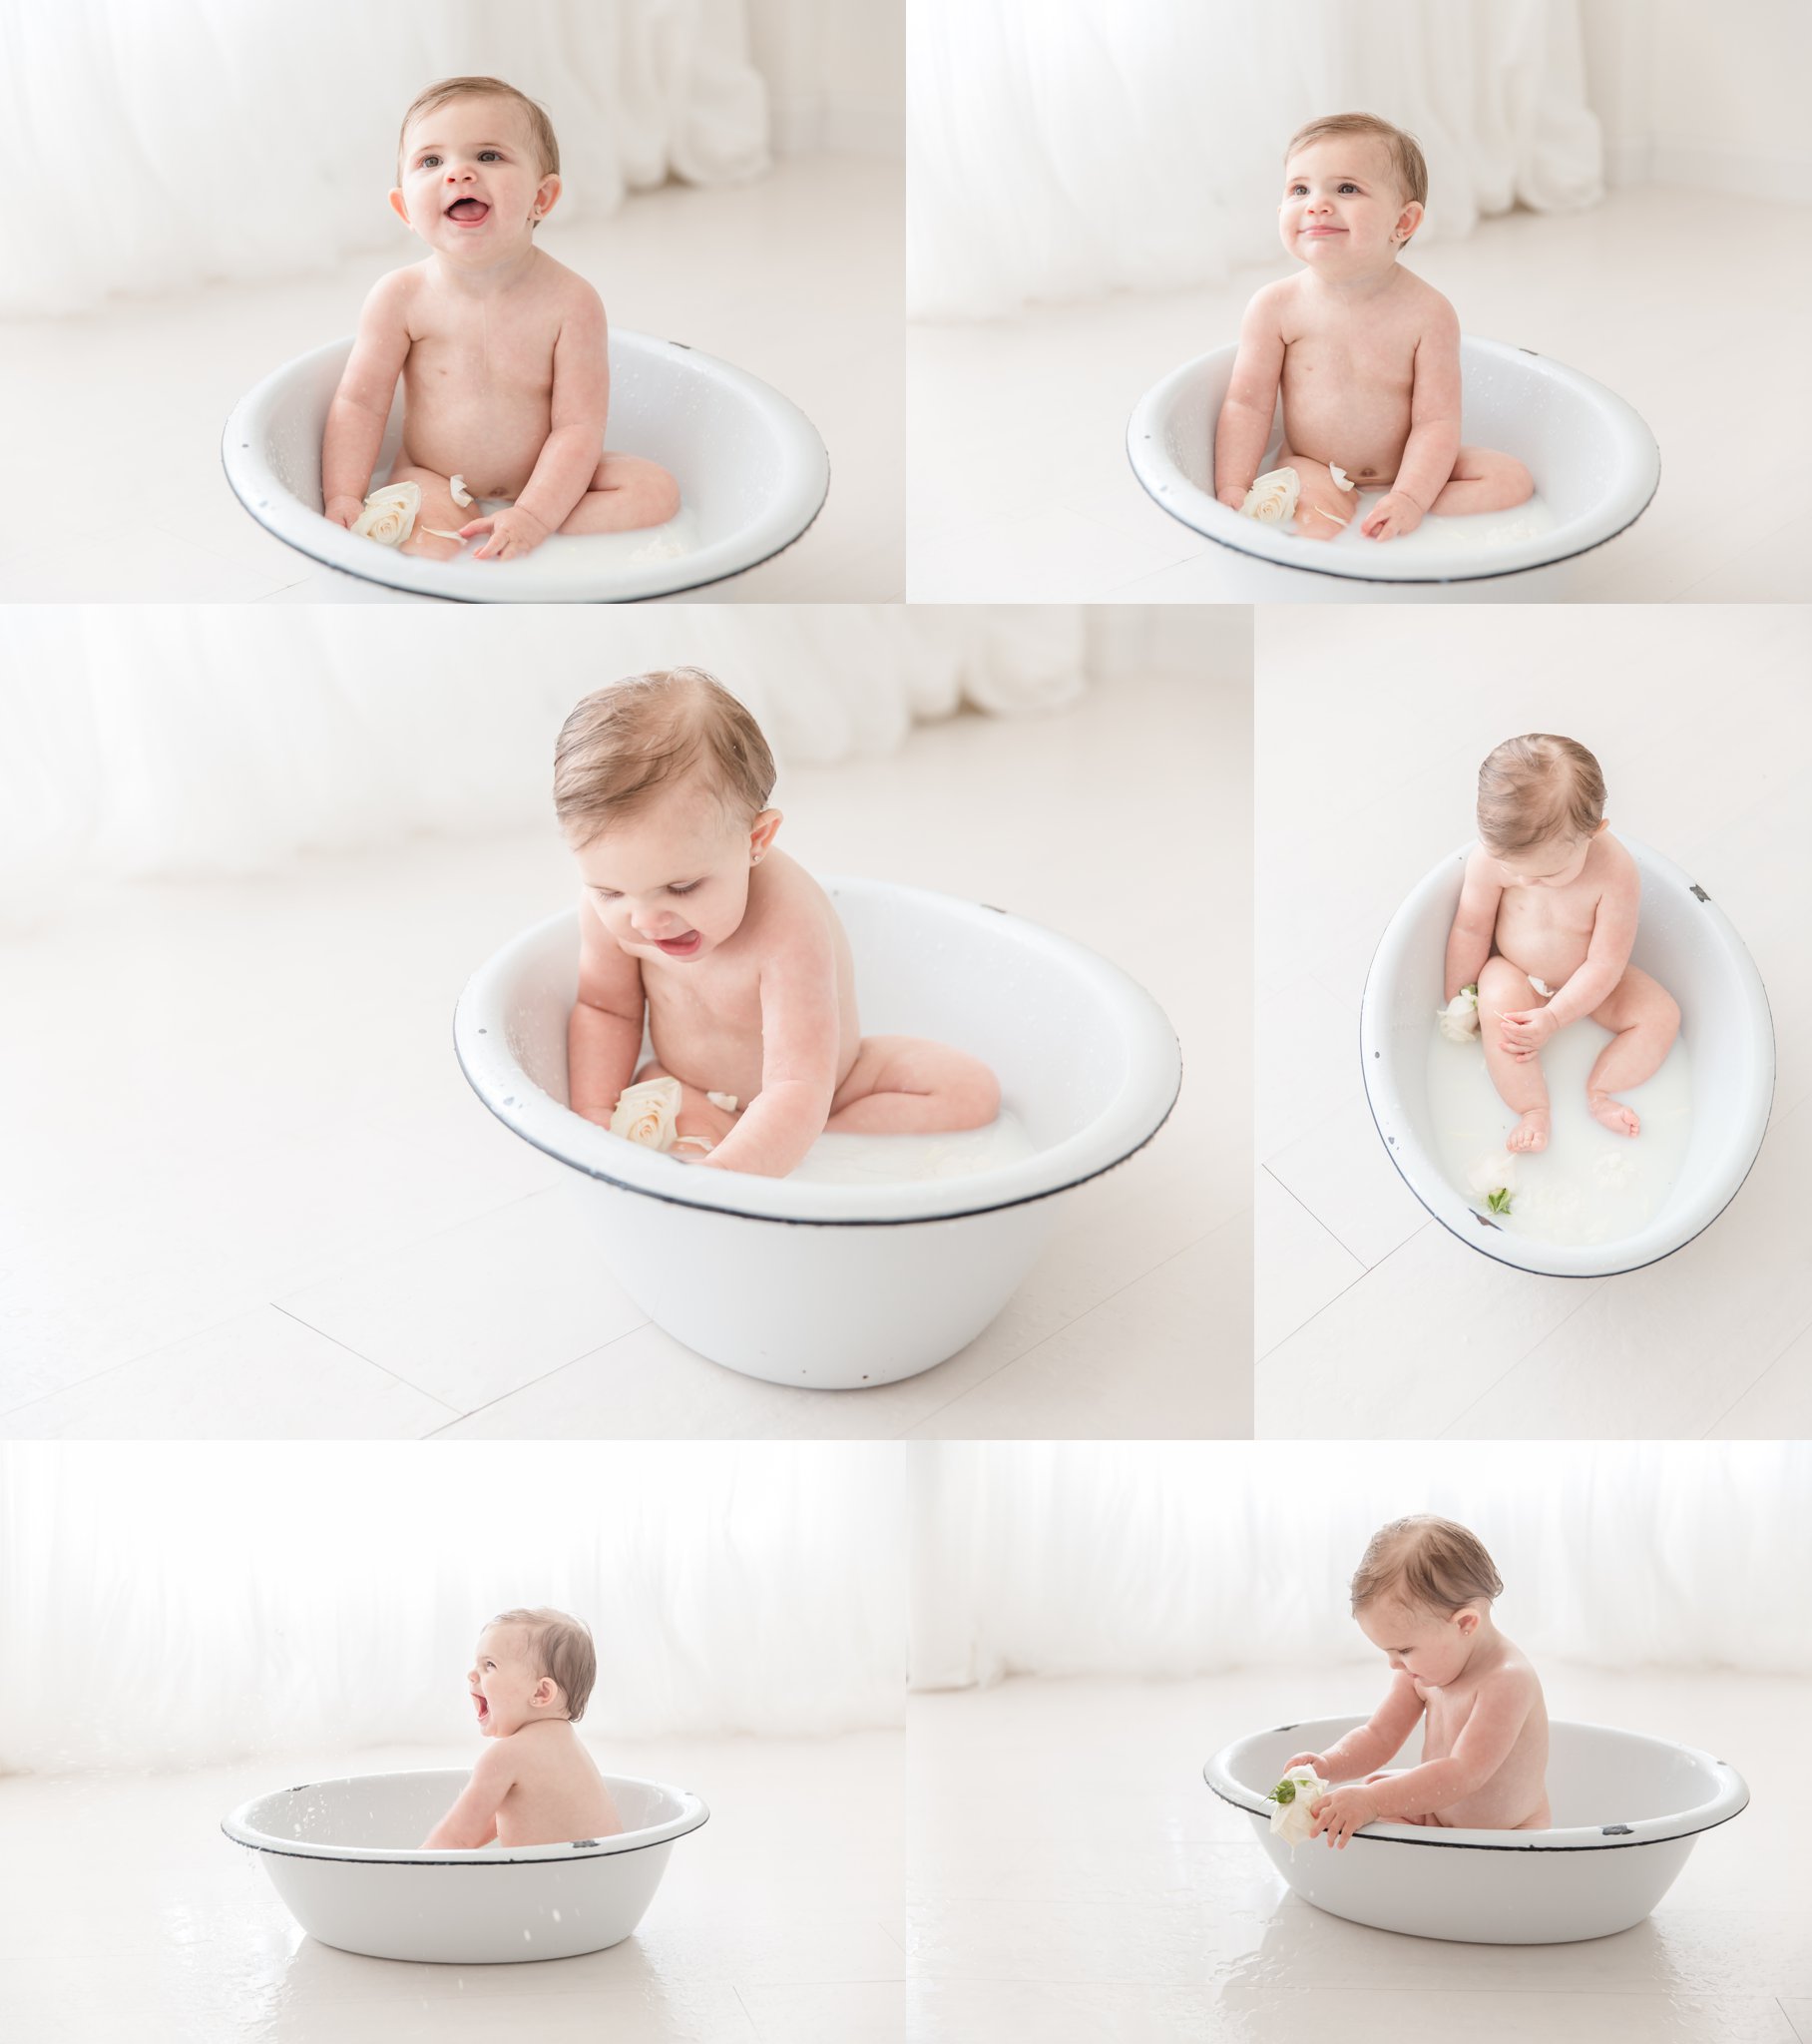 One year old baby playing in an antique wash basin in jupiter florida photo studio.  